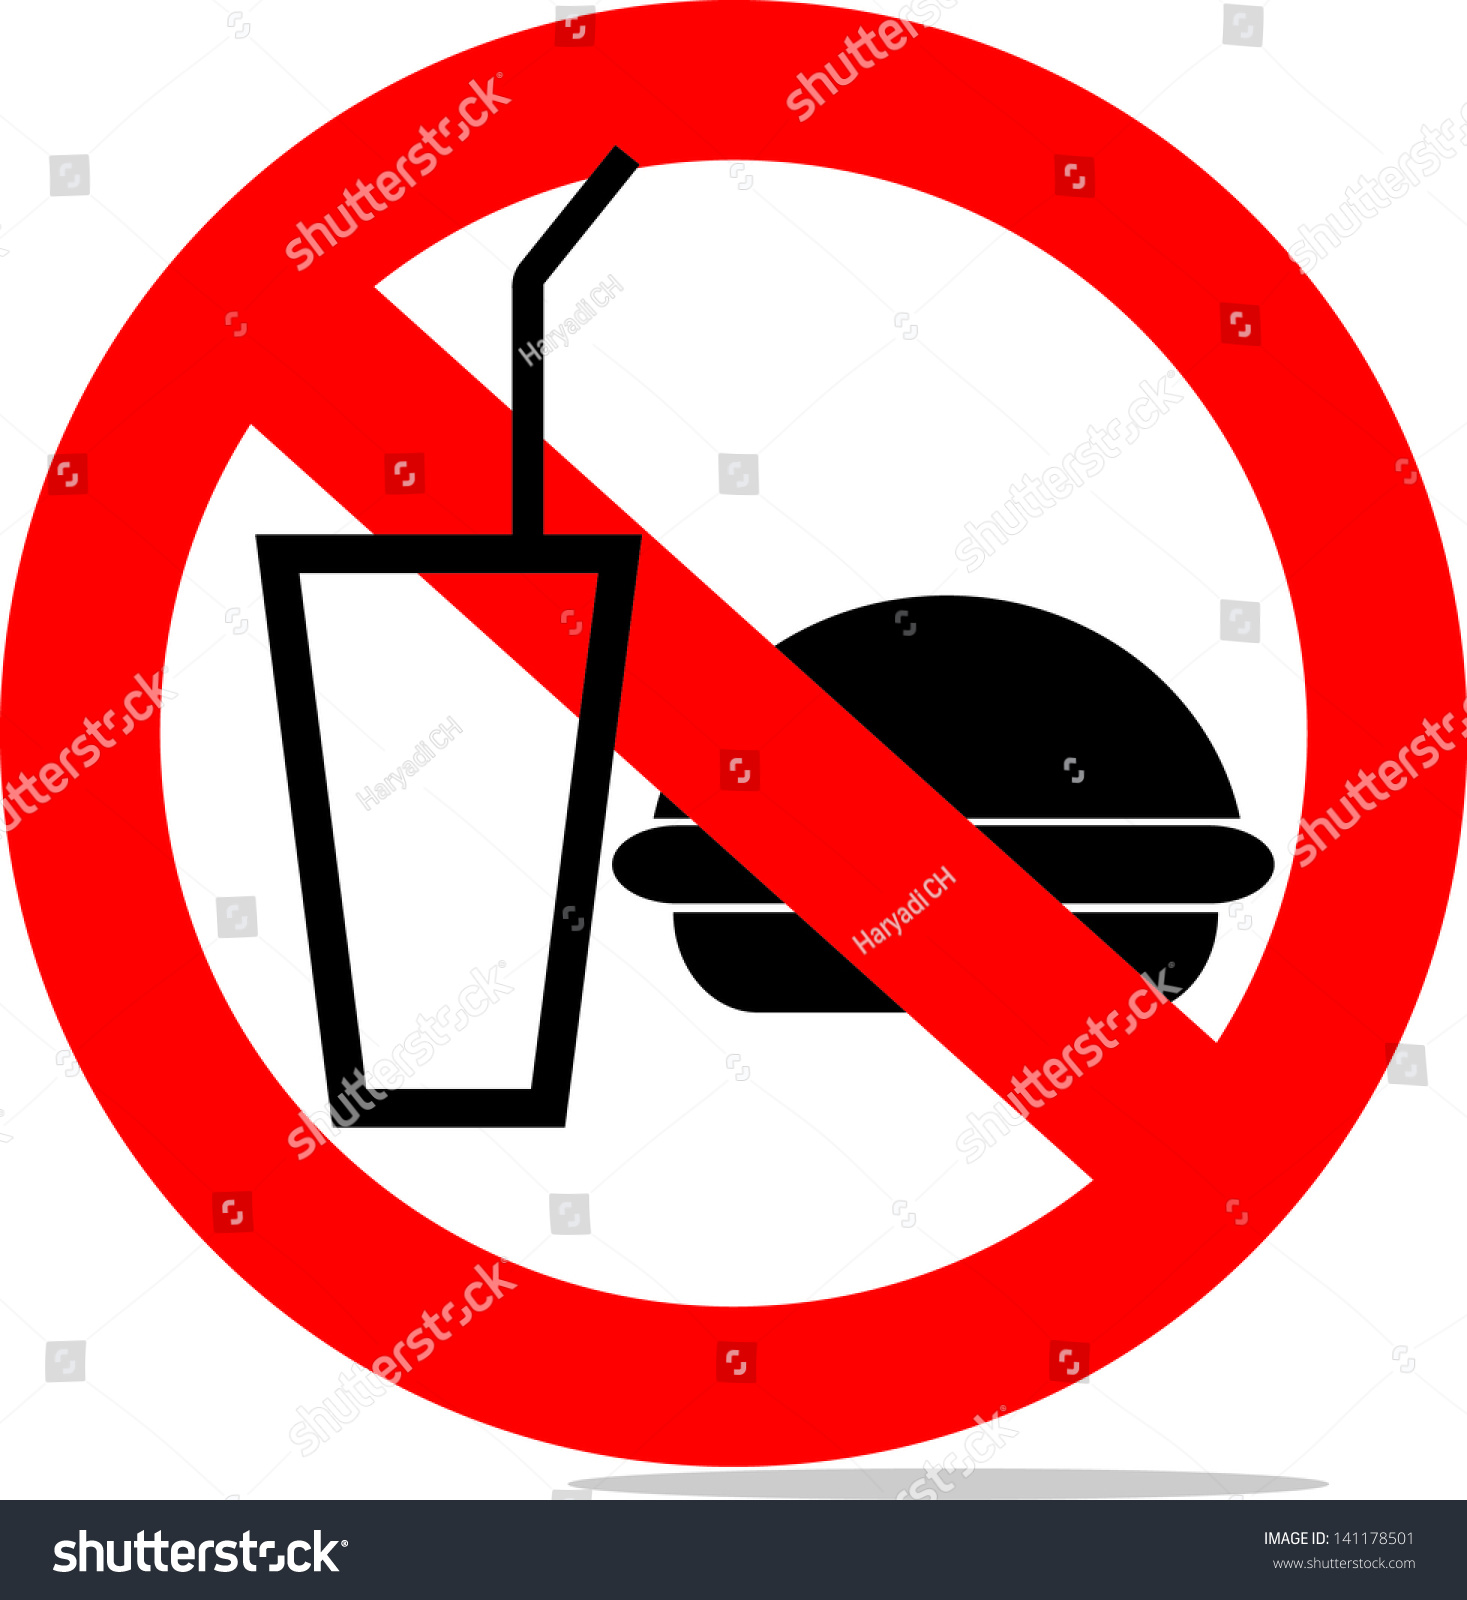 No Eating And Drinking, Icon Vector - 141178501 : Shutterstock